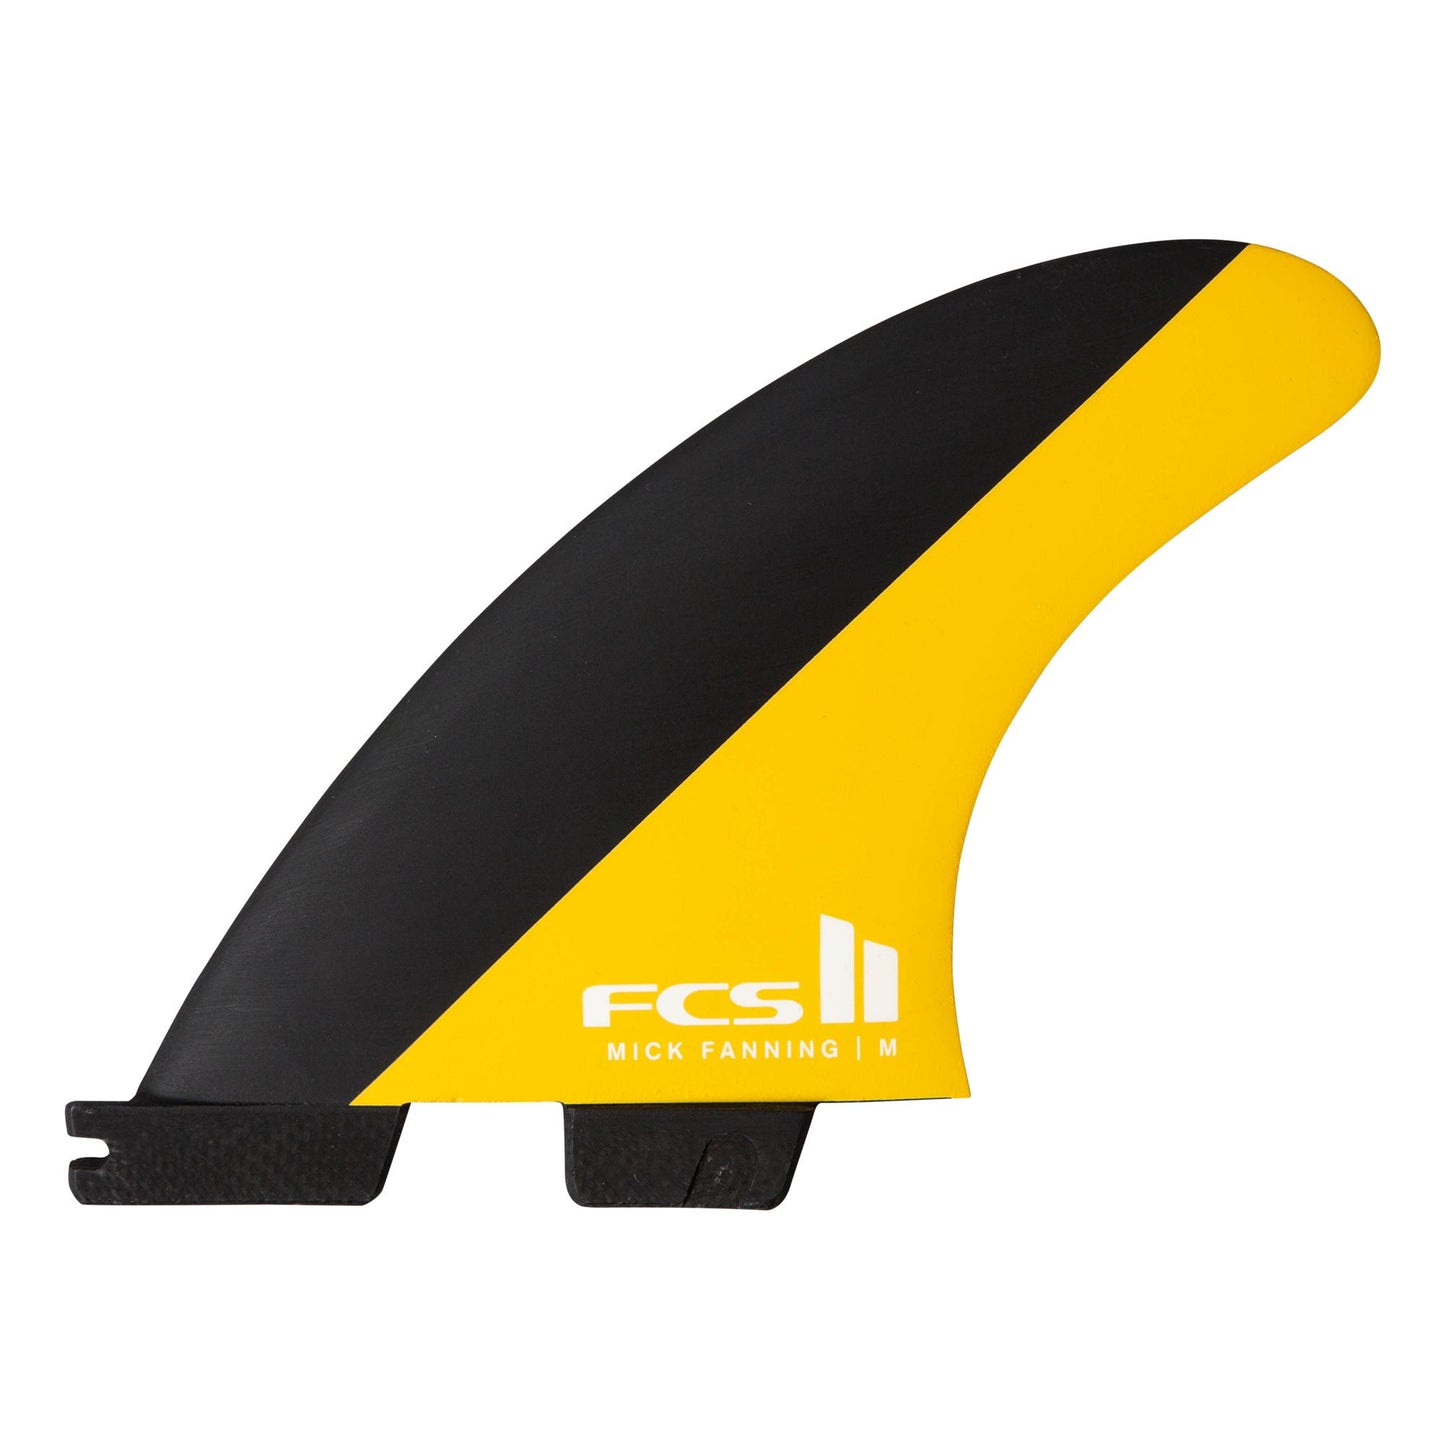 FCS II MF PC Large Tri Surfboard Fin Set showing 1 front/side fin in black and mango